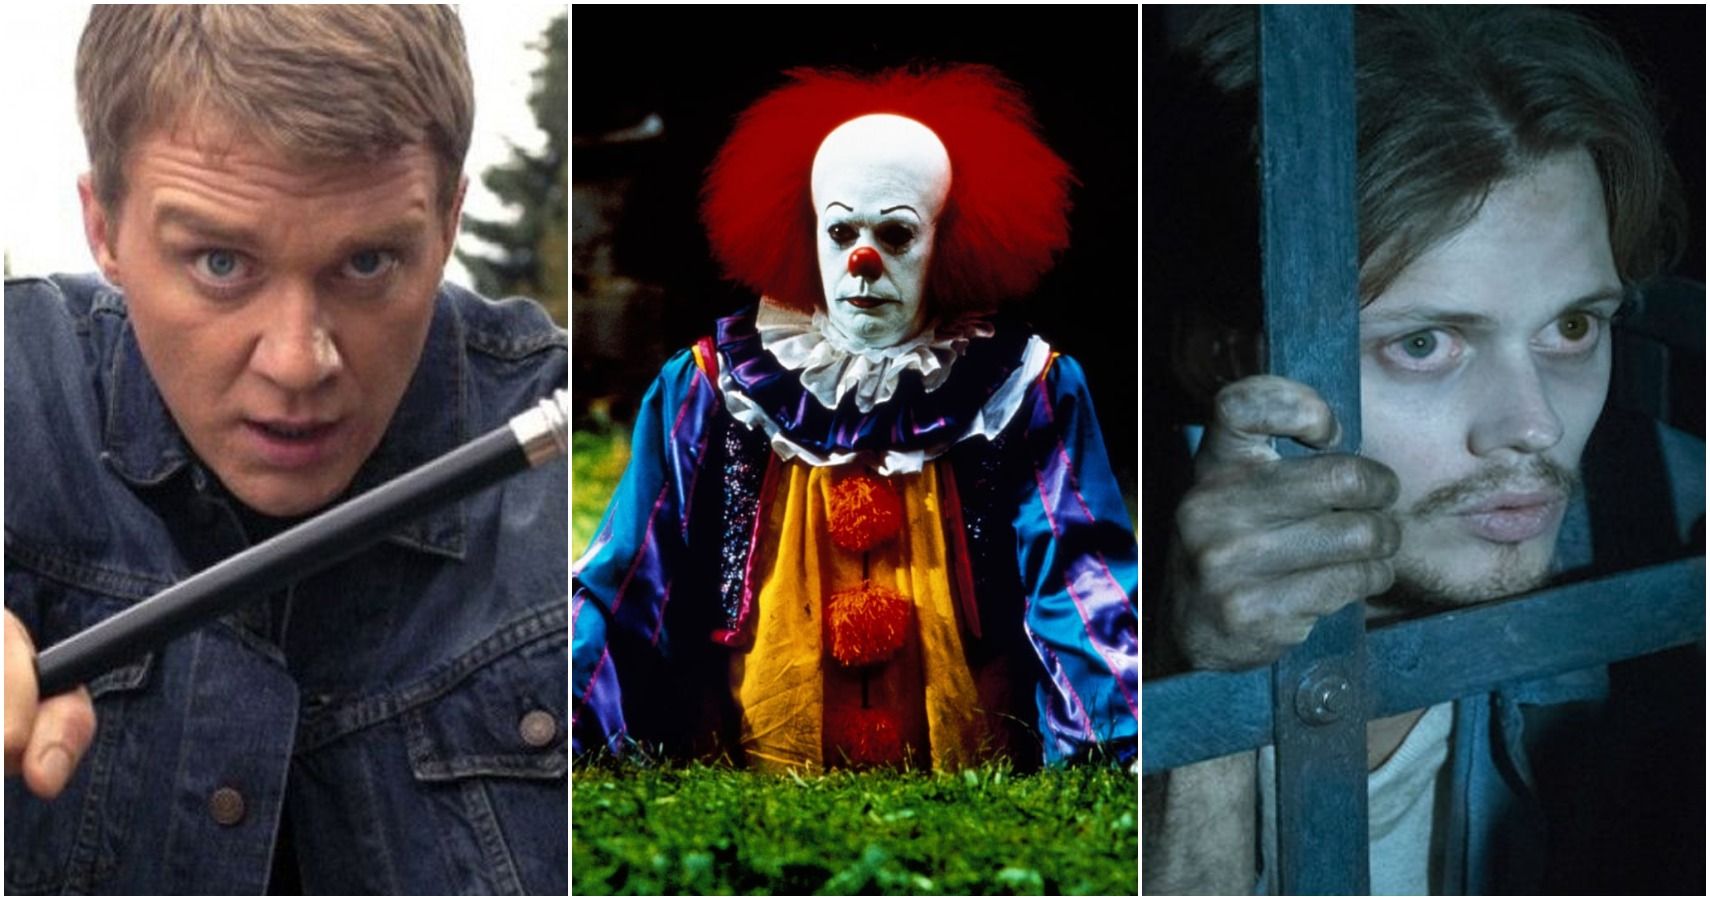 10 Shows Based On Stephen King Novels To Watch If You Liked The Outsider